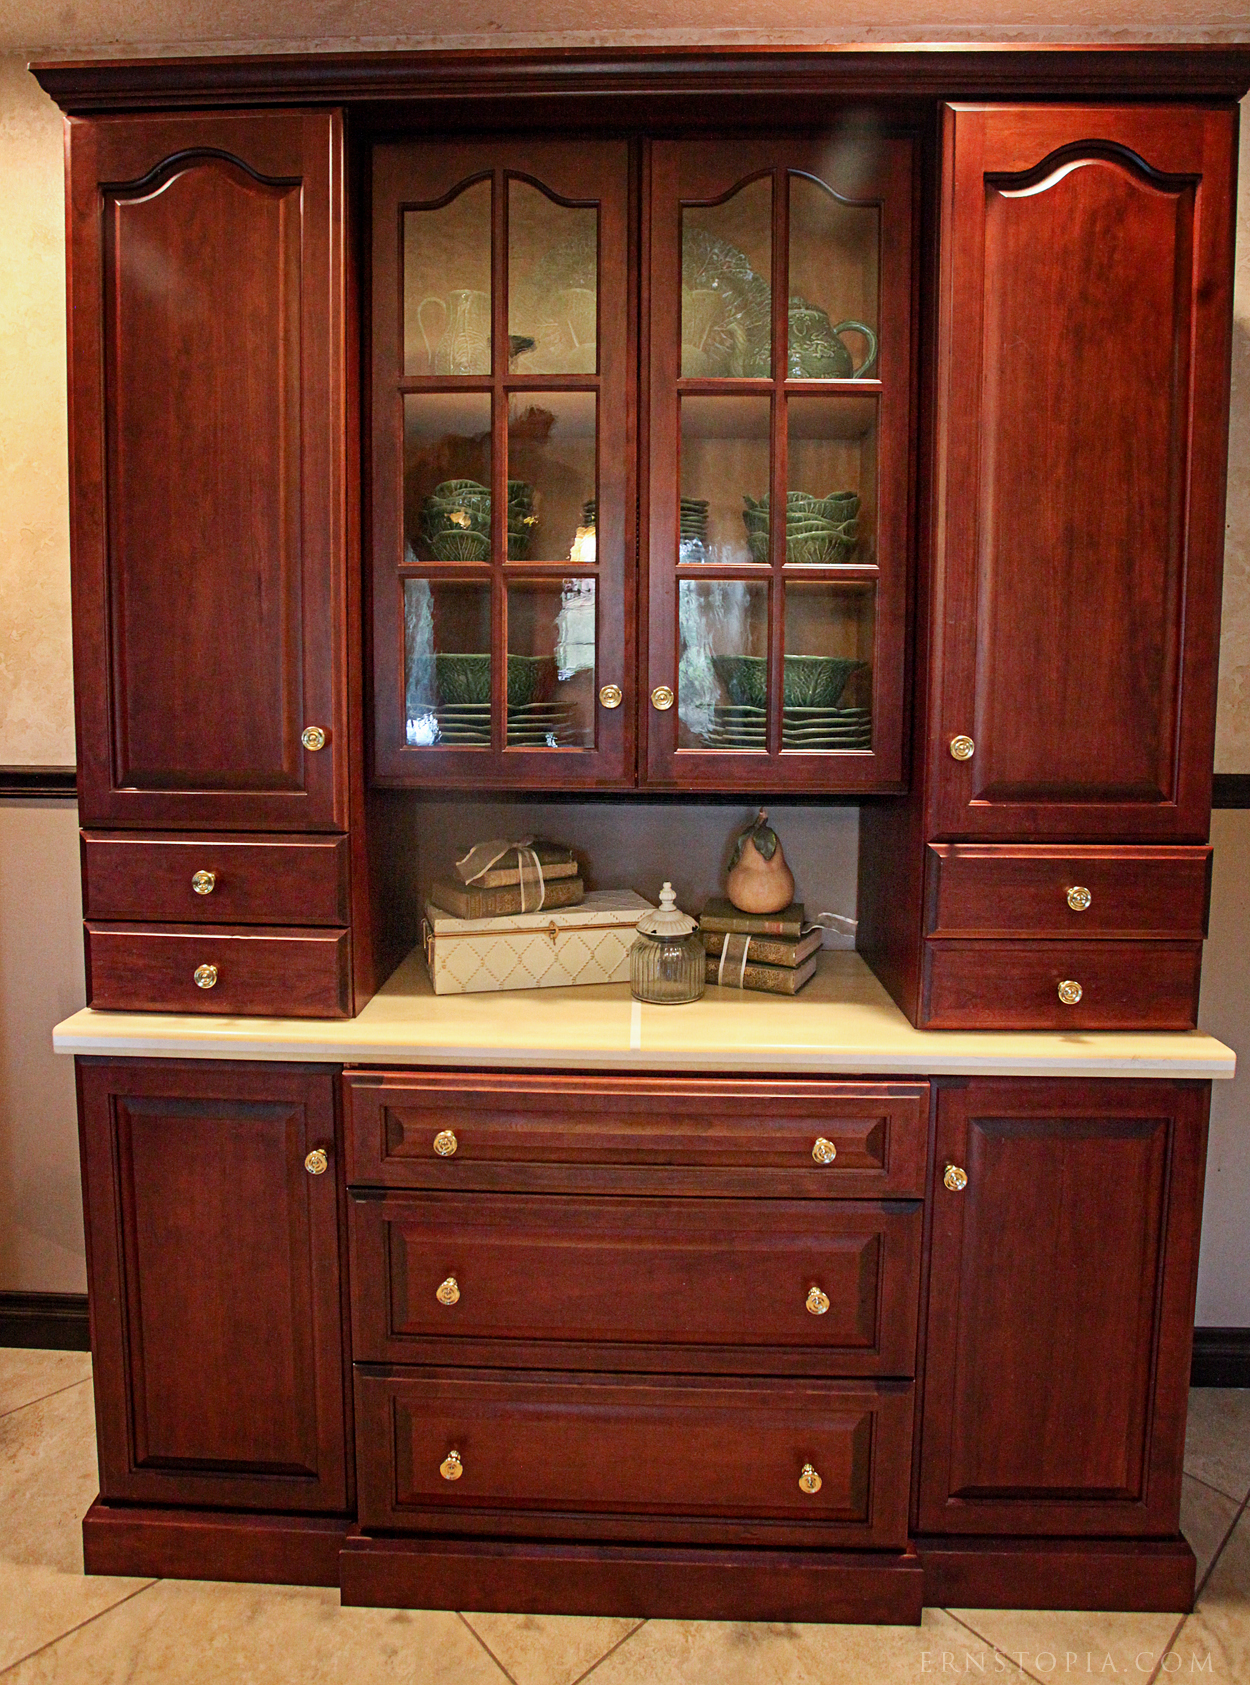 My dining room hutch features glass doors and cupboards that extend to the counter as well as drawers and lower cabinets that store my linens and larger serving pieces.